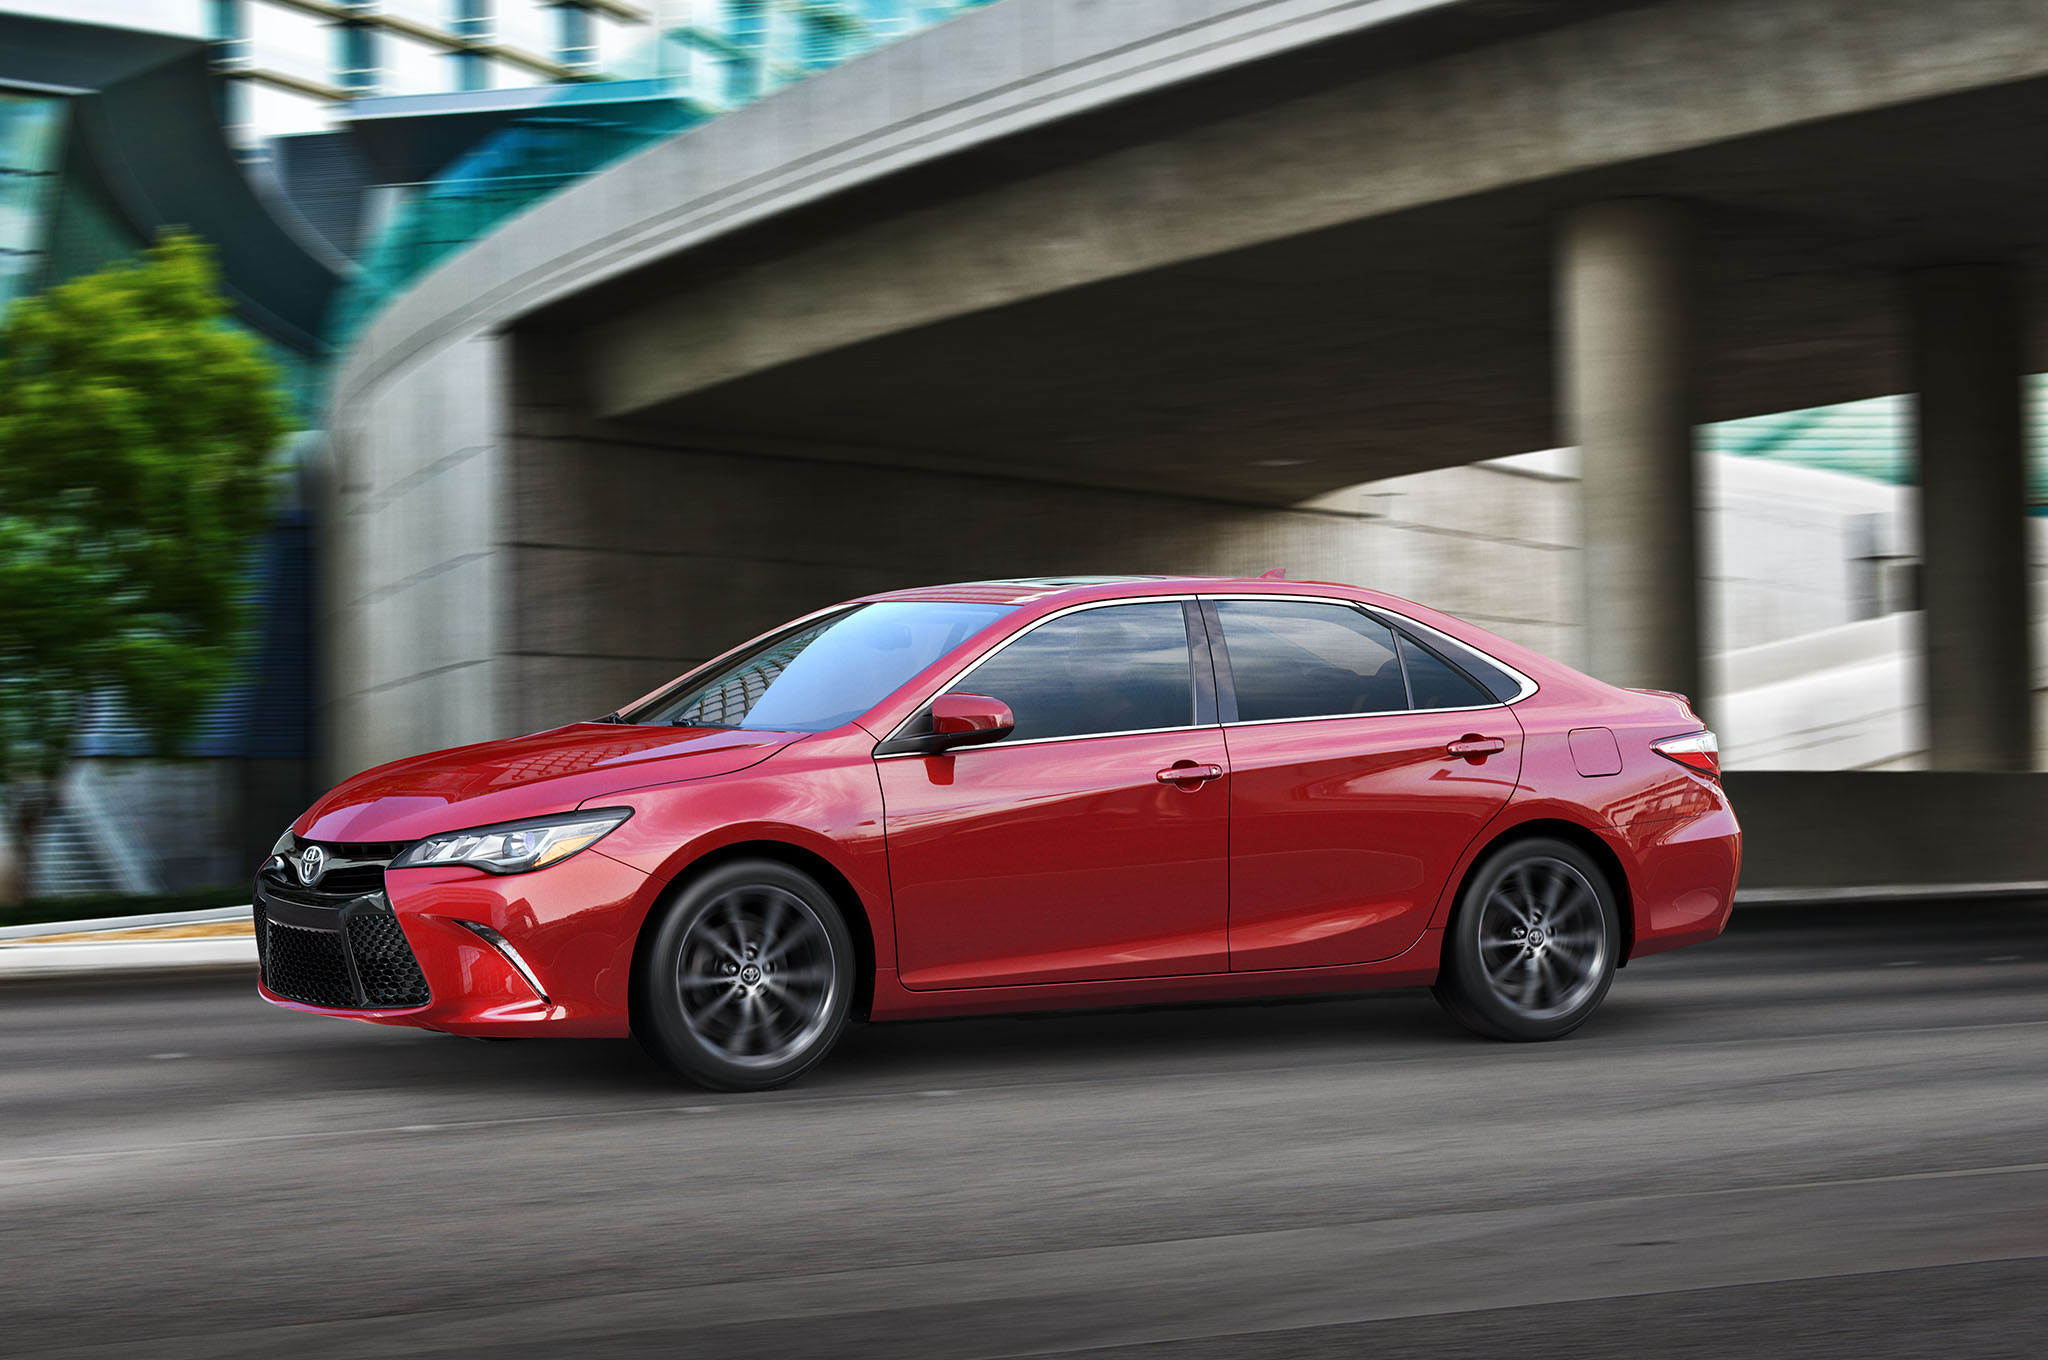 2048x1360 2015 Toyota Camry Wallpapers | High Resolution Wallpaper | Toyota Camry  Photo Gallery | #20